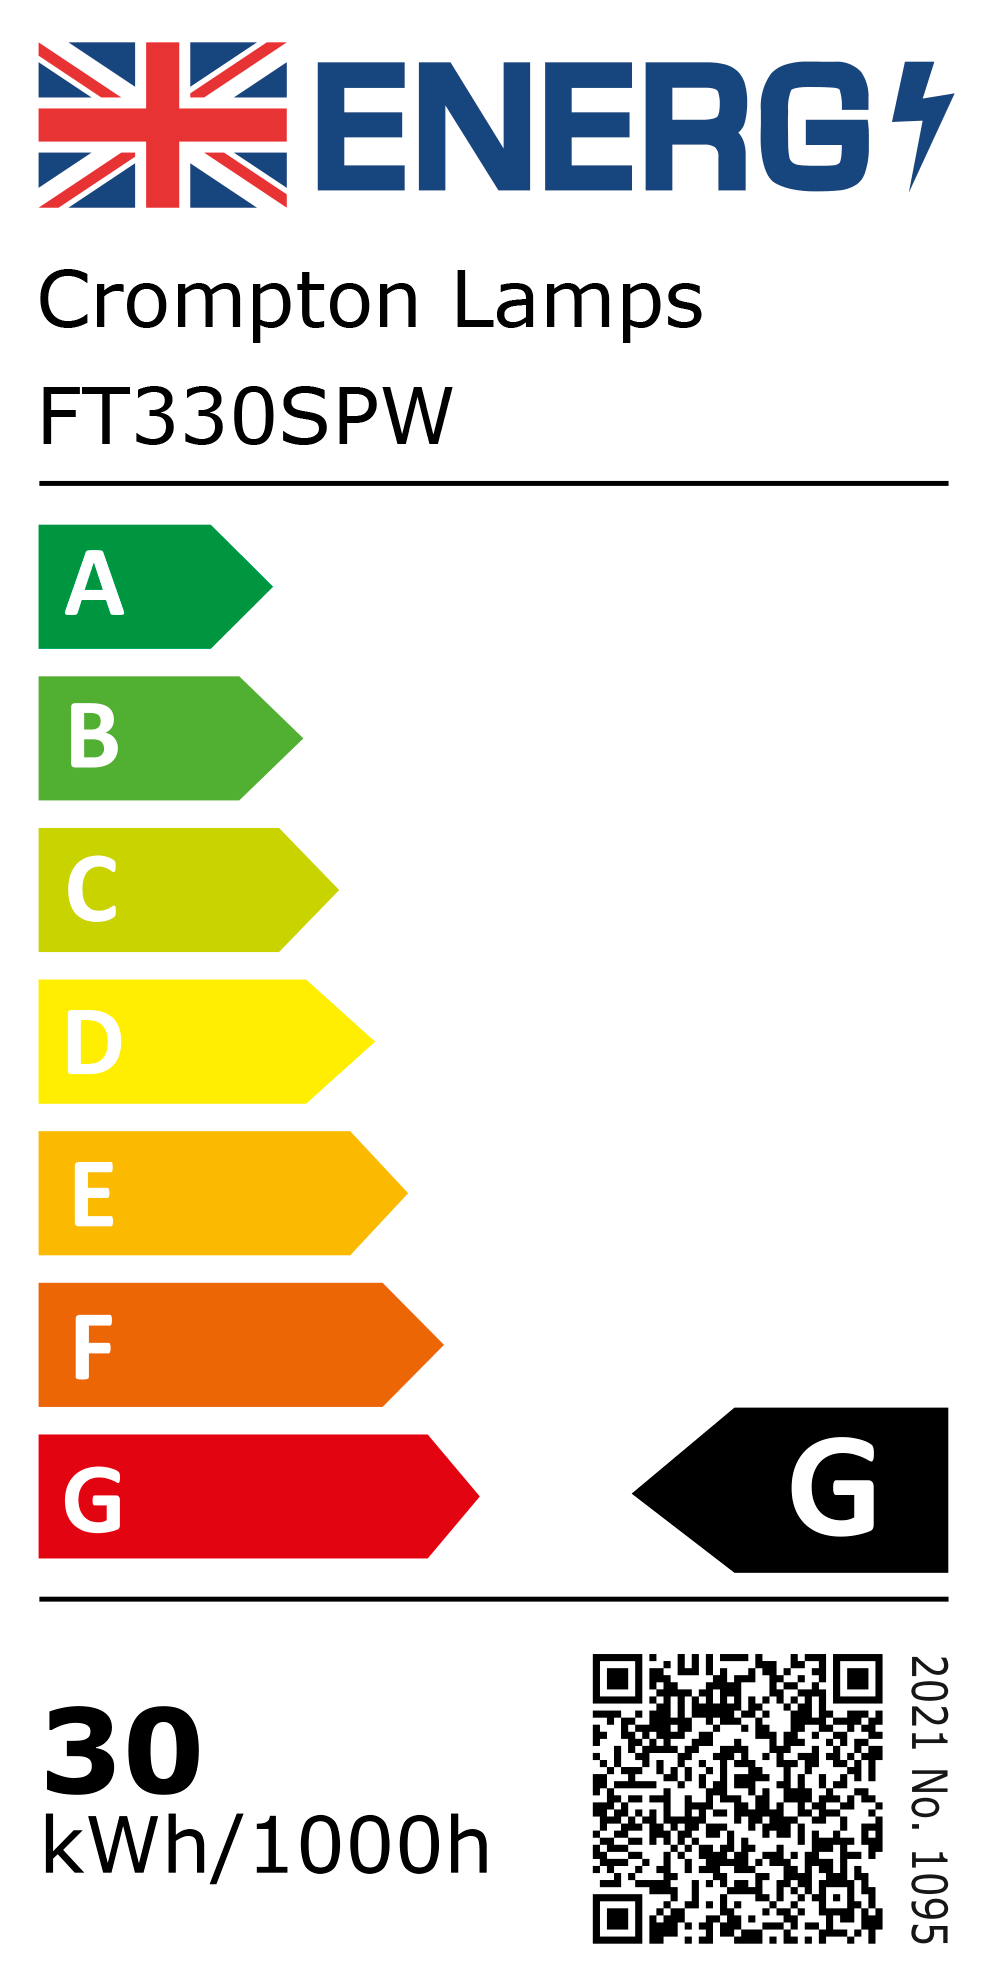 New 2021 Energy Rating Label: Stock Code FT330SPW